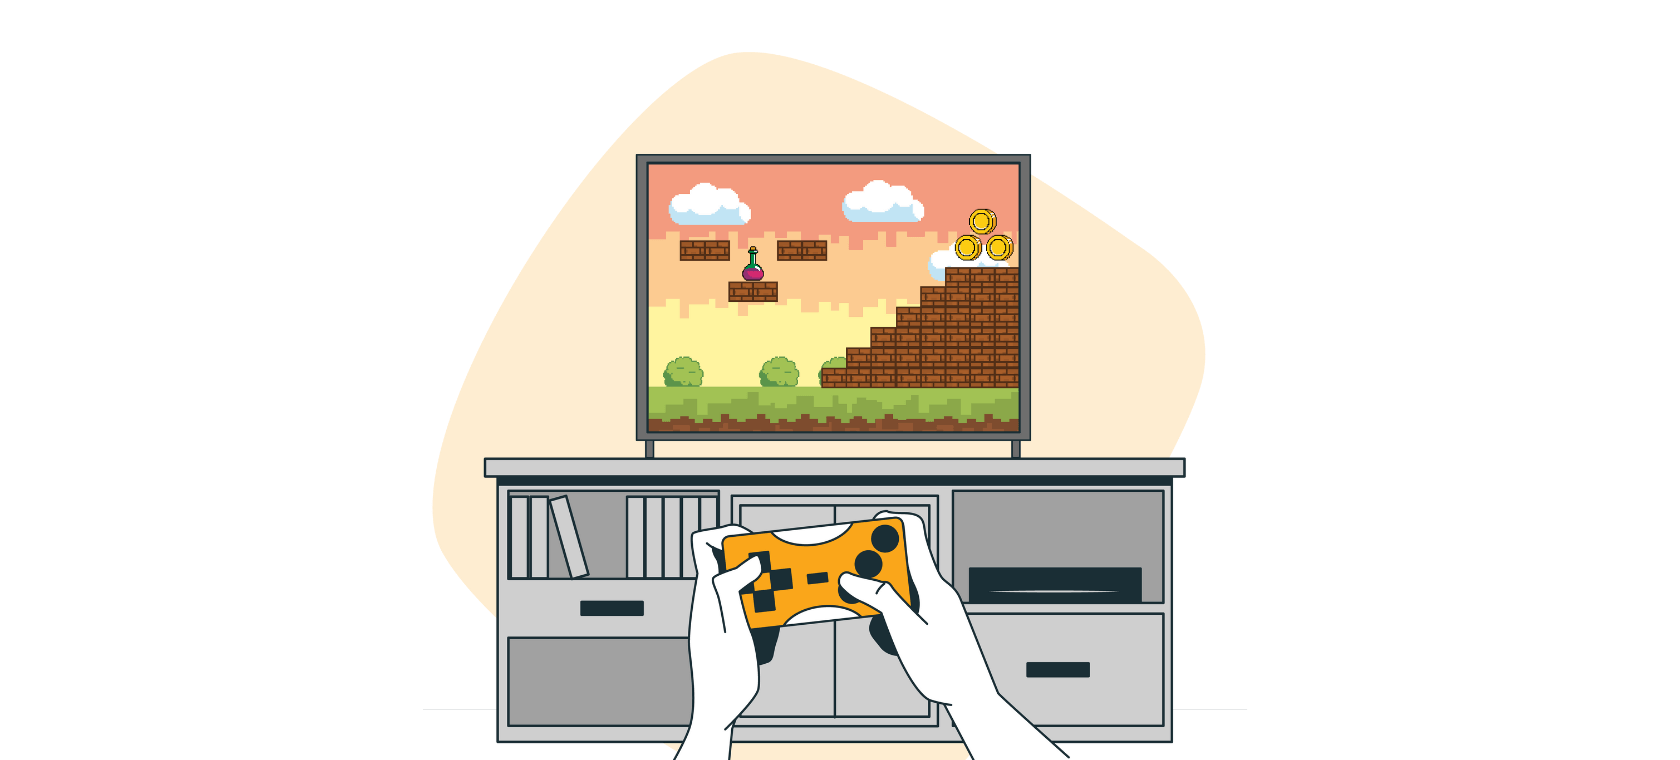 The illustration shows an orange video game console.